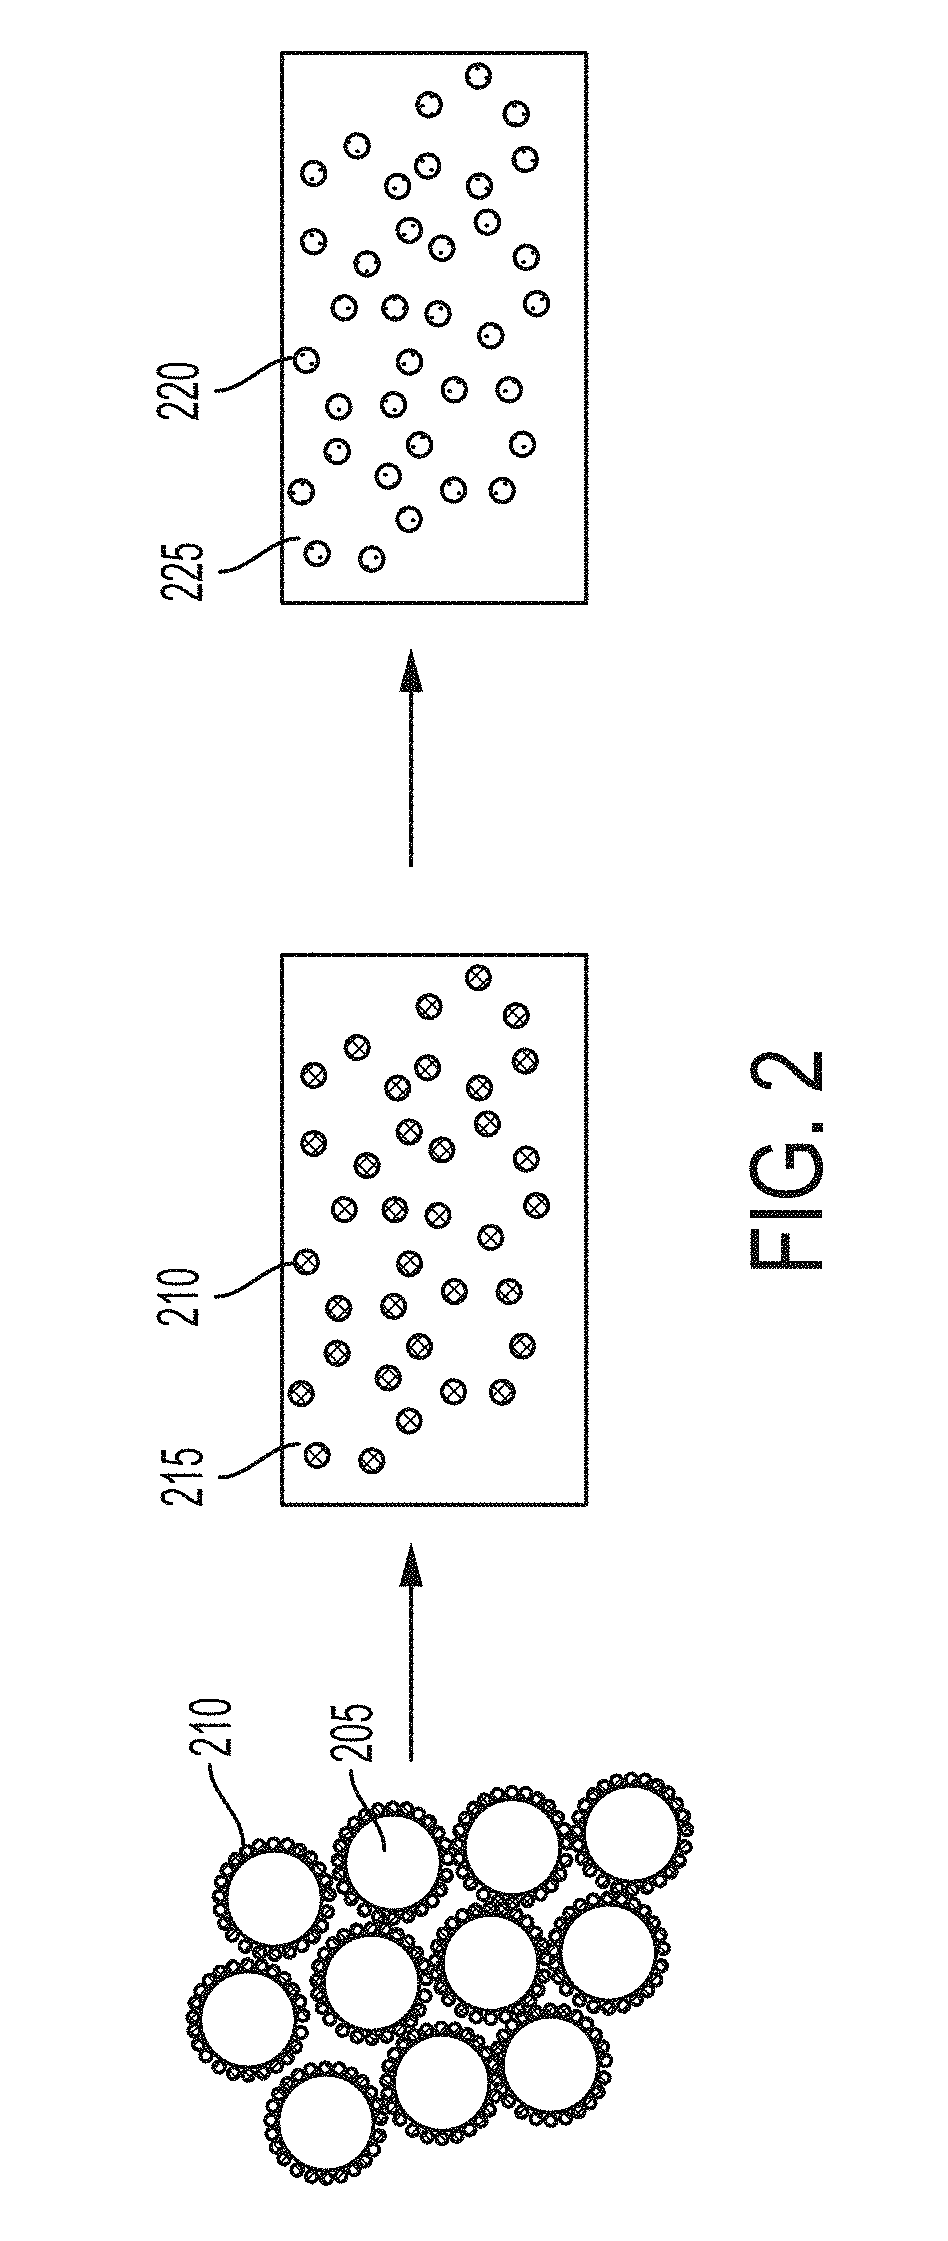 Materials and methods for producing metal nanocomposites, and metal nanocomposites obtained therefrom